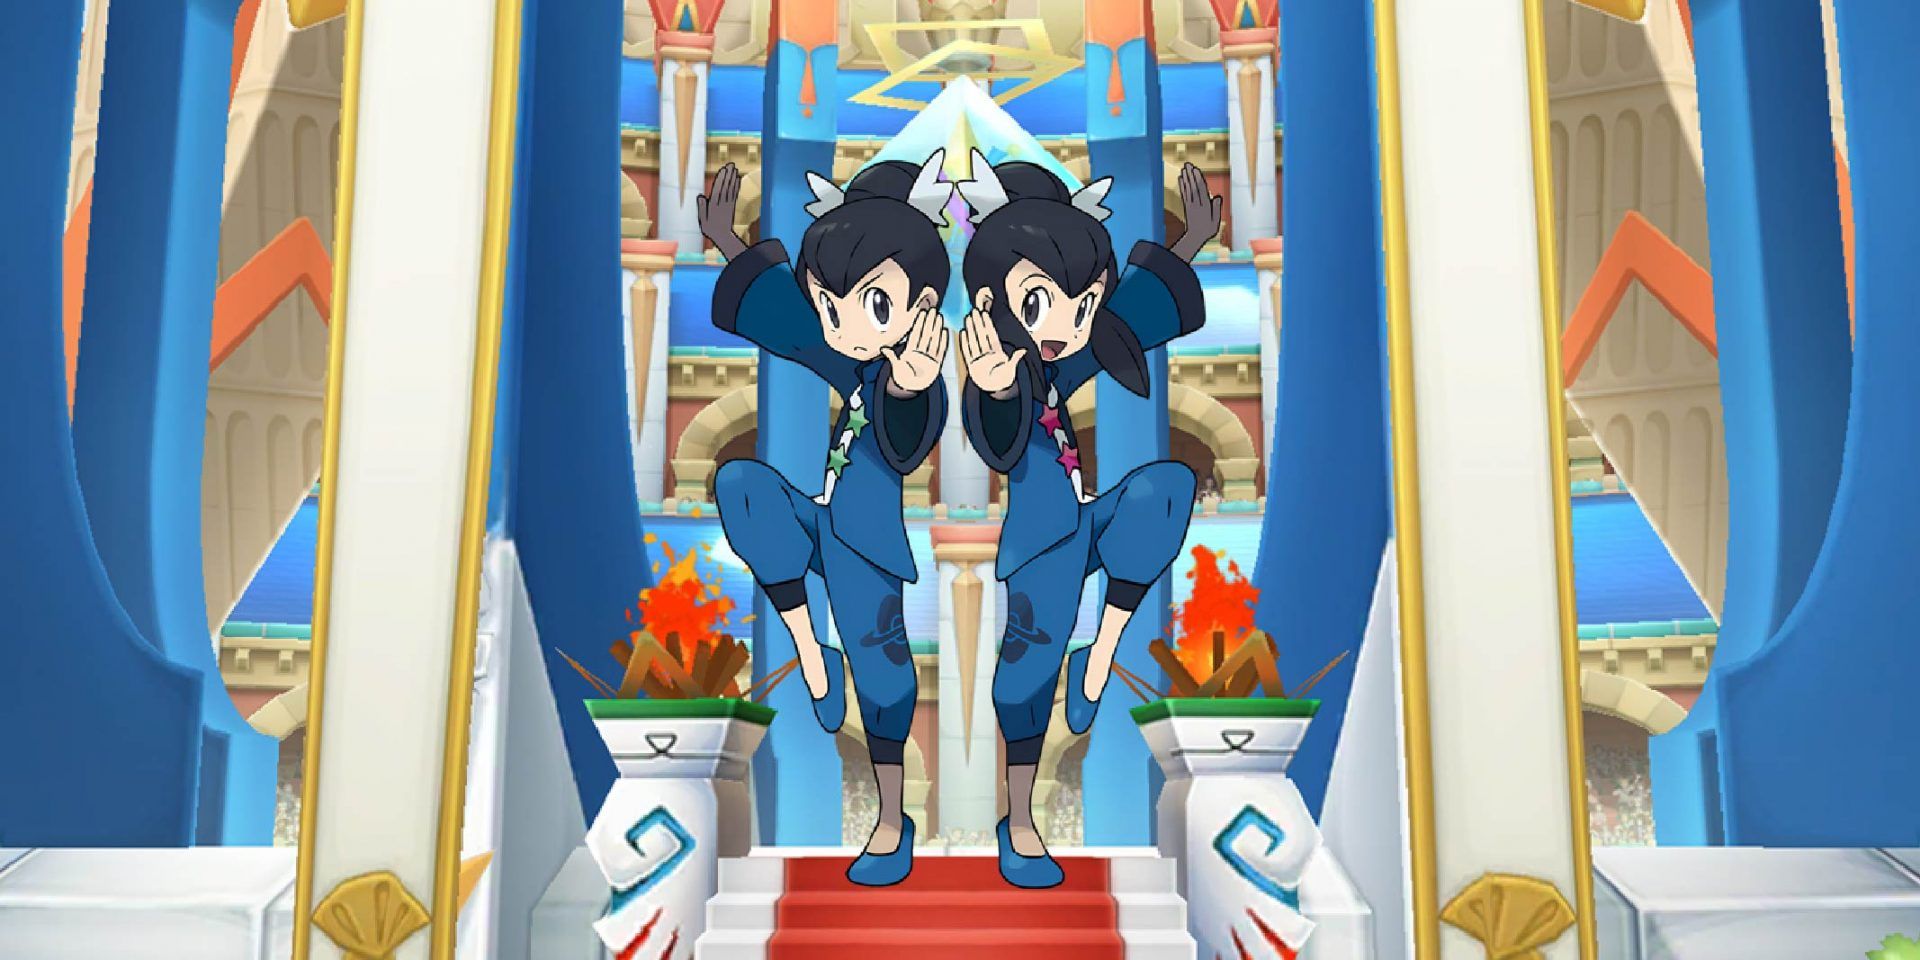 Tate and Liza from Pokémon standing against an arena backdrop.